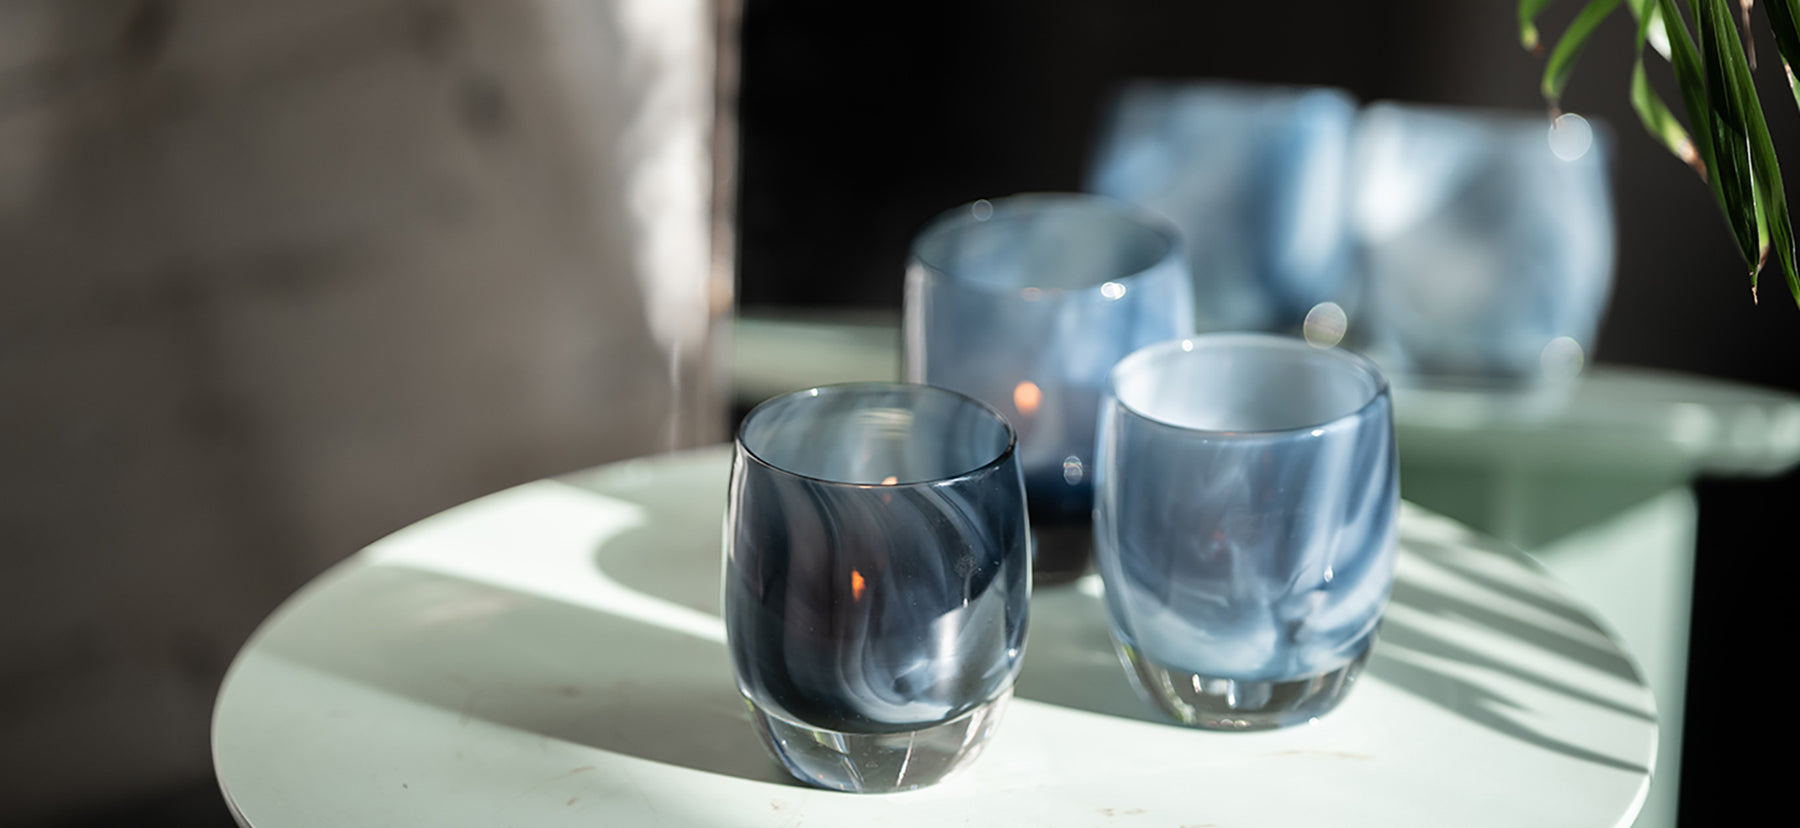 3 dark blue and white swirled patterned hand-blown glass candle holders names 'i see you' sitting on a white table in the sun.